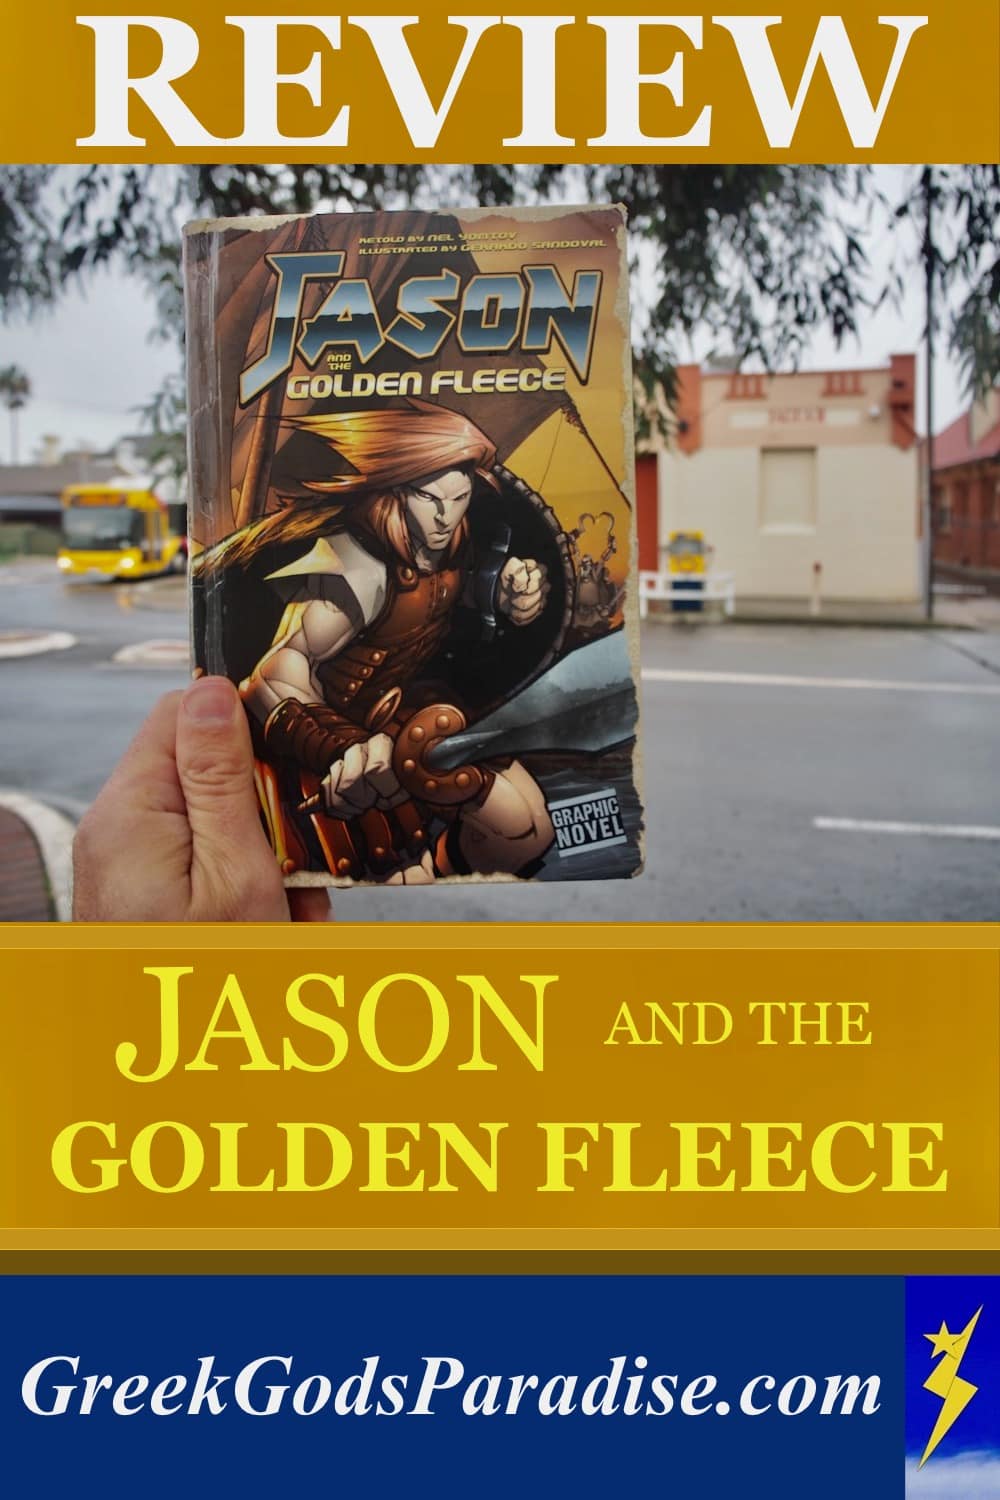 Jason and the Golden Fleece Nel Yomtov Review